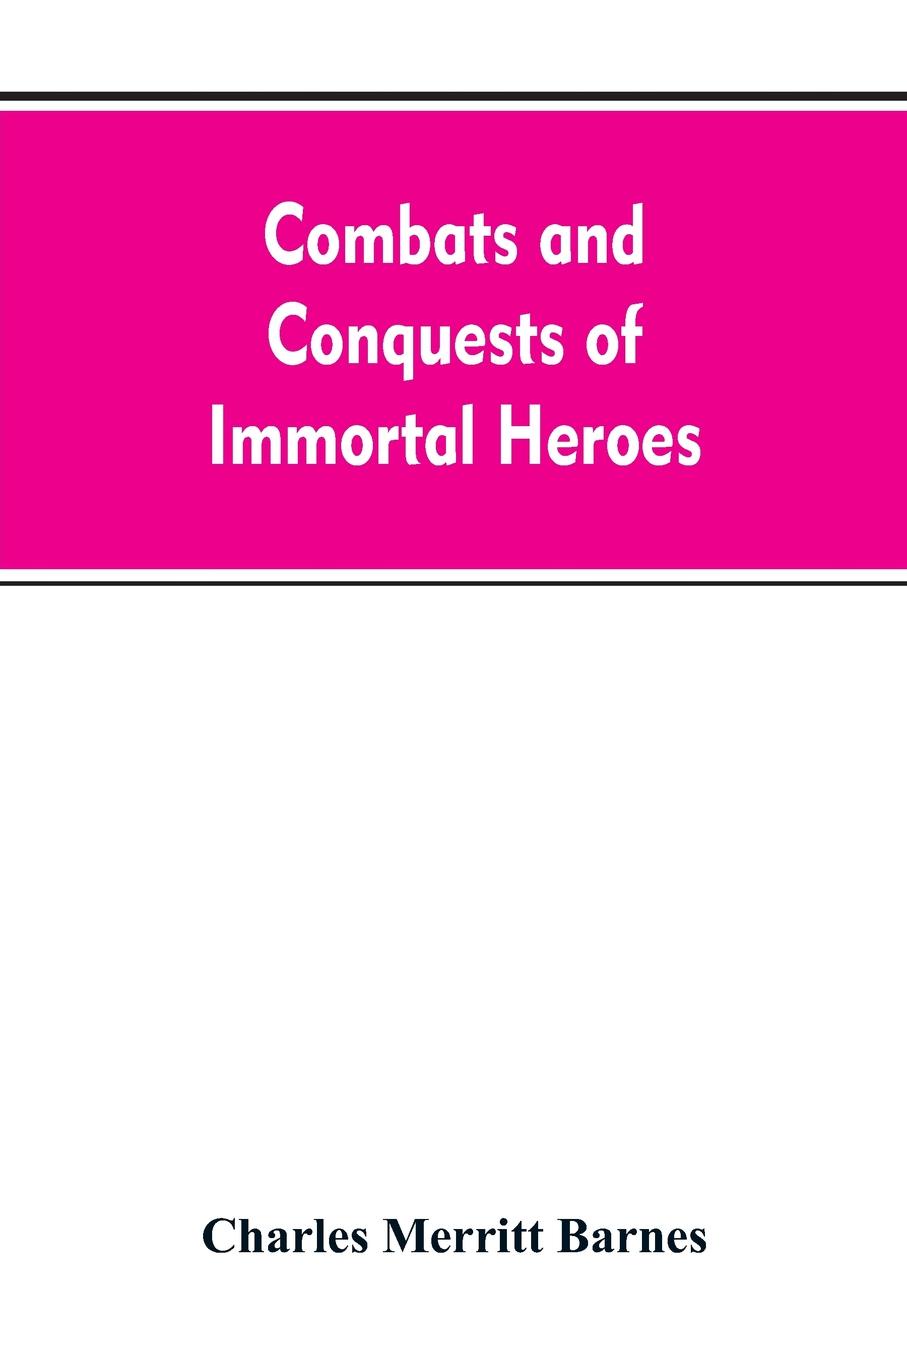 Combats and Conquests of Immortal Heroes. Sung in Song and Told in Story